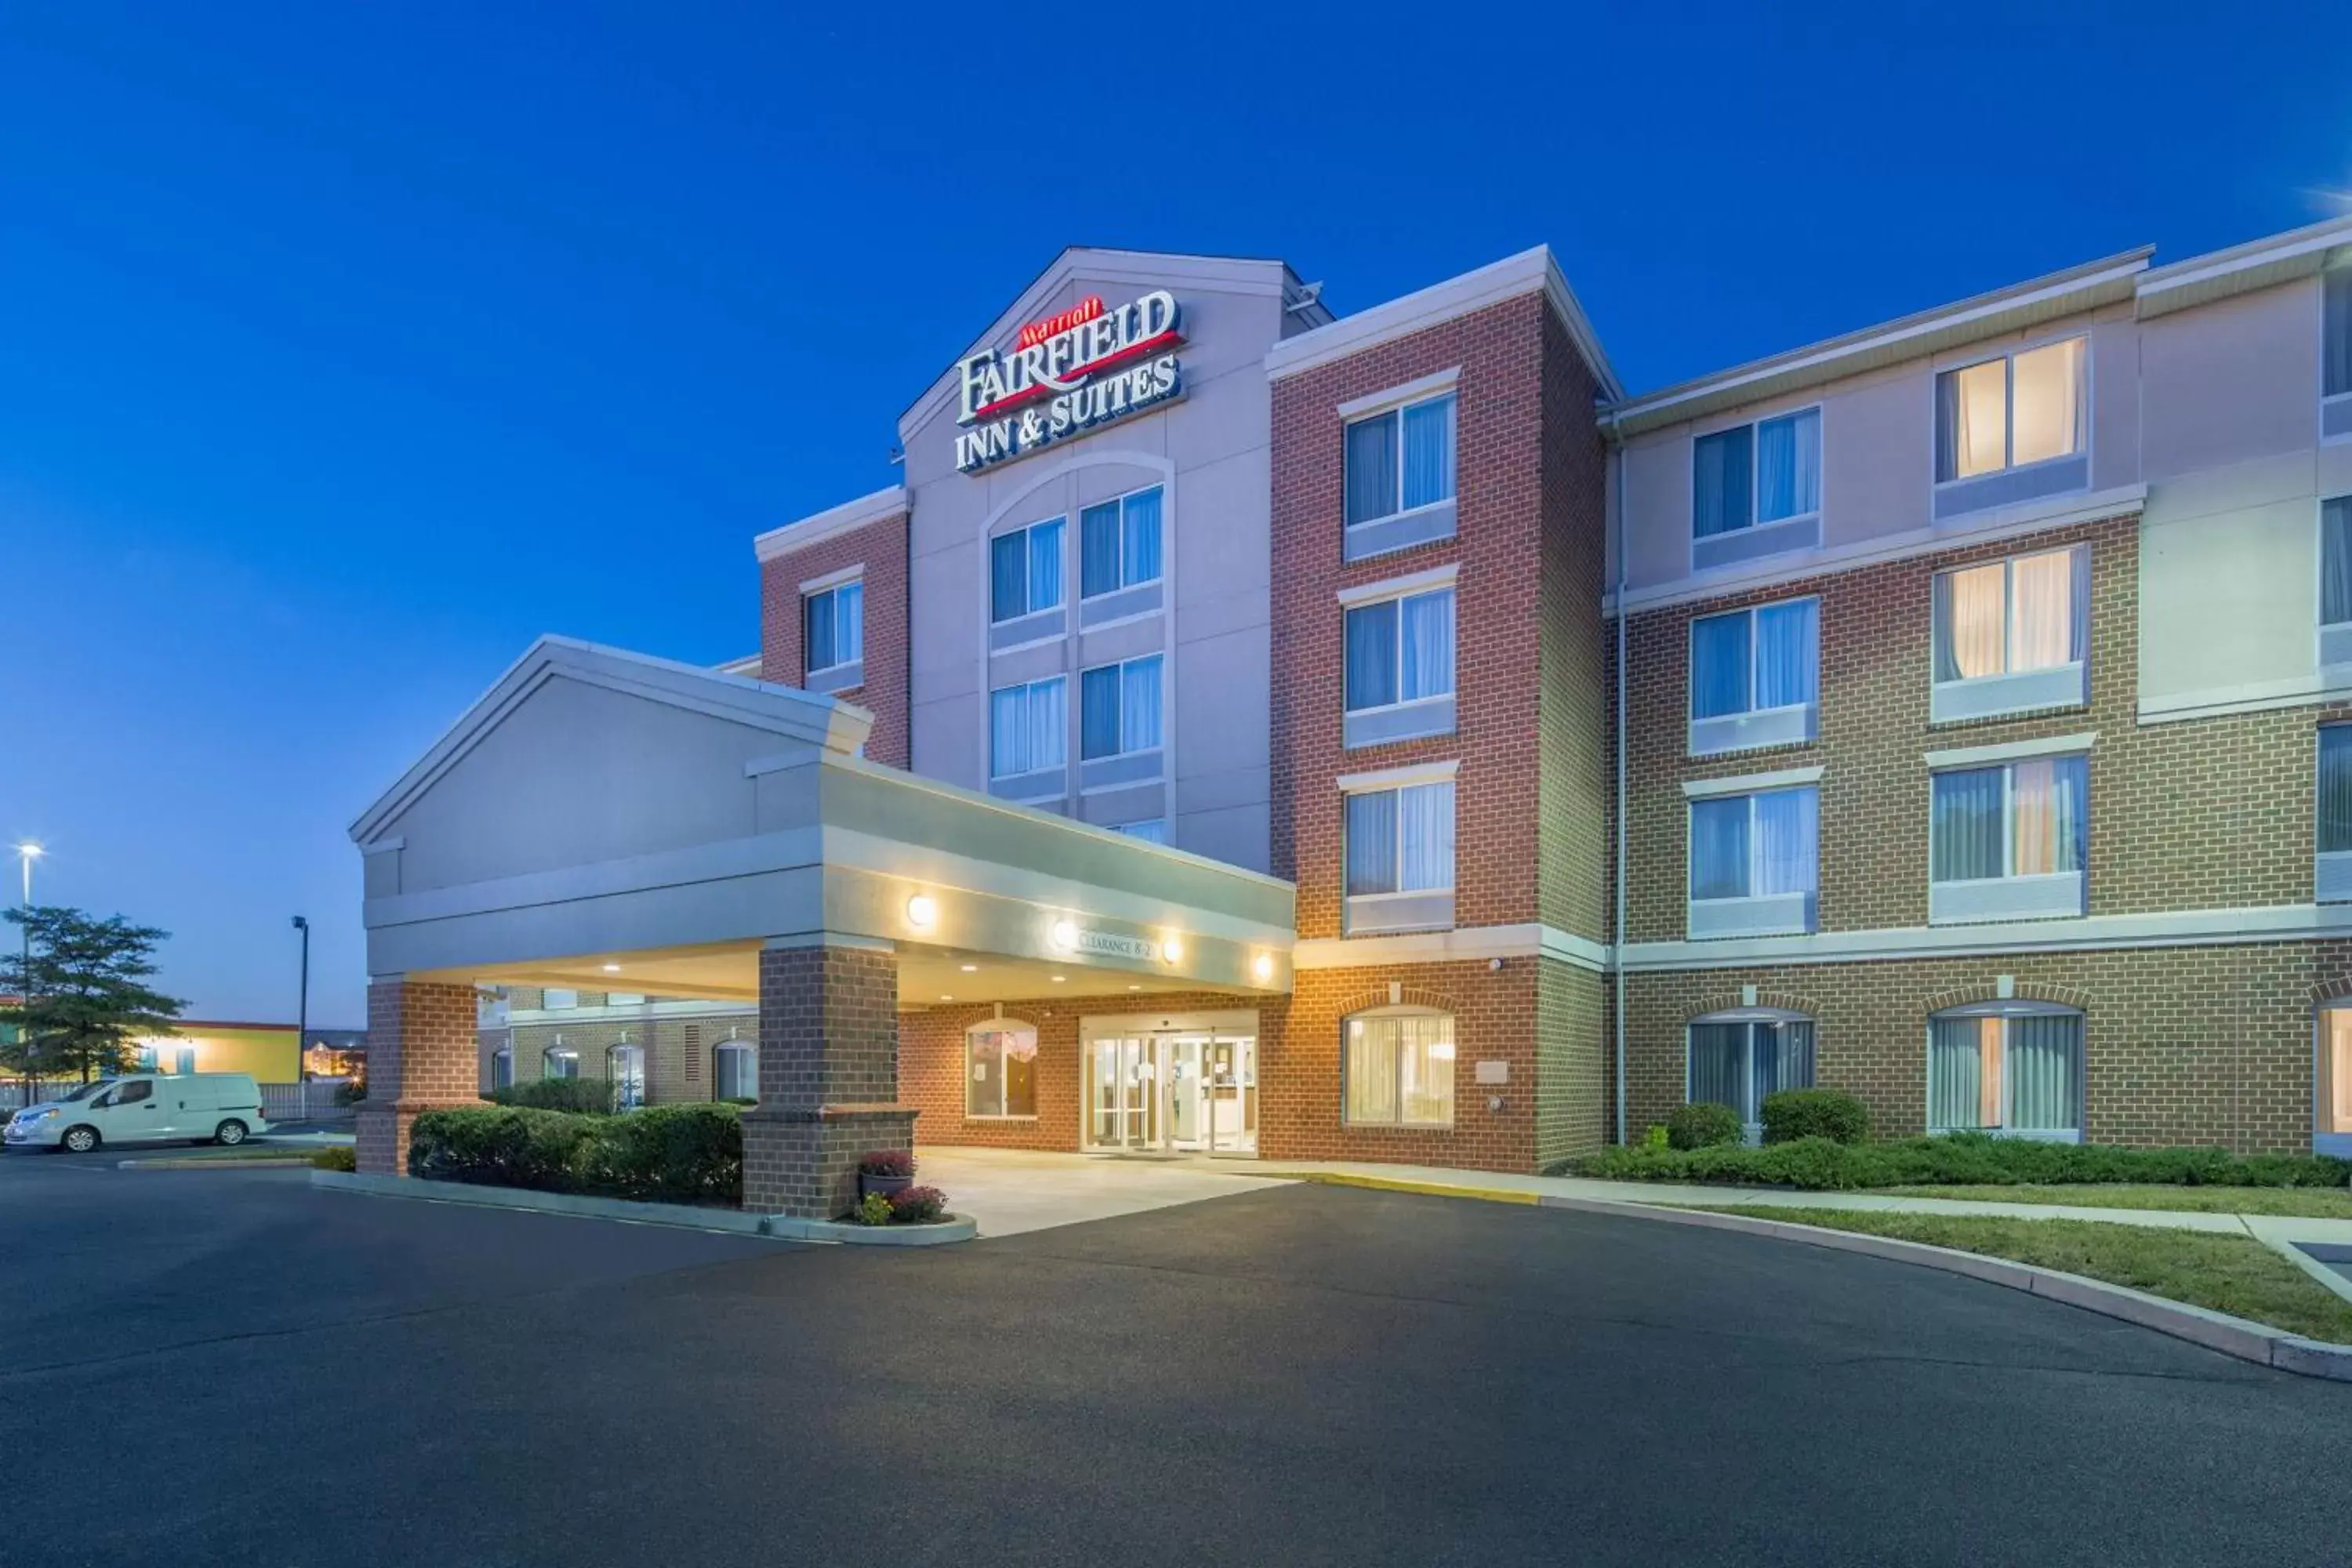 Property Building in Fairfield Inn & Suites by Marriott Dover